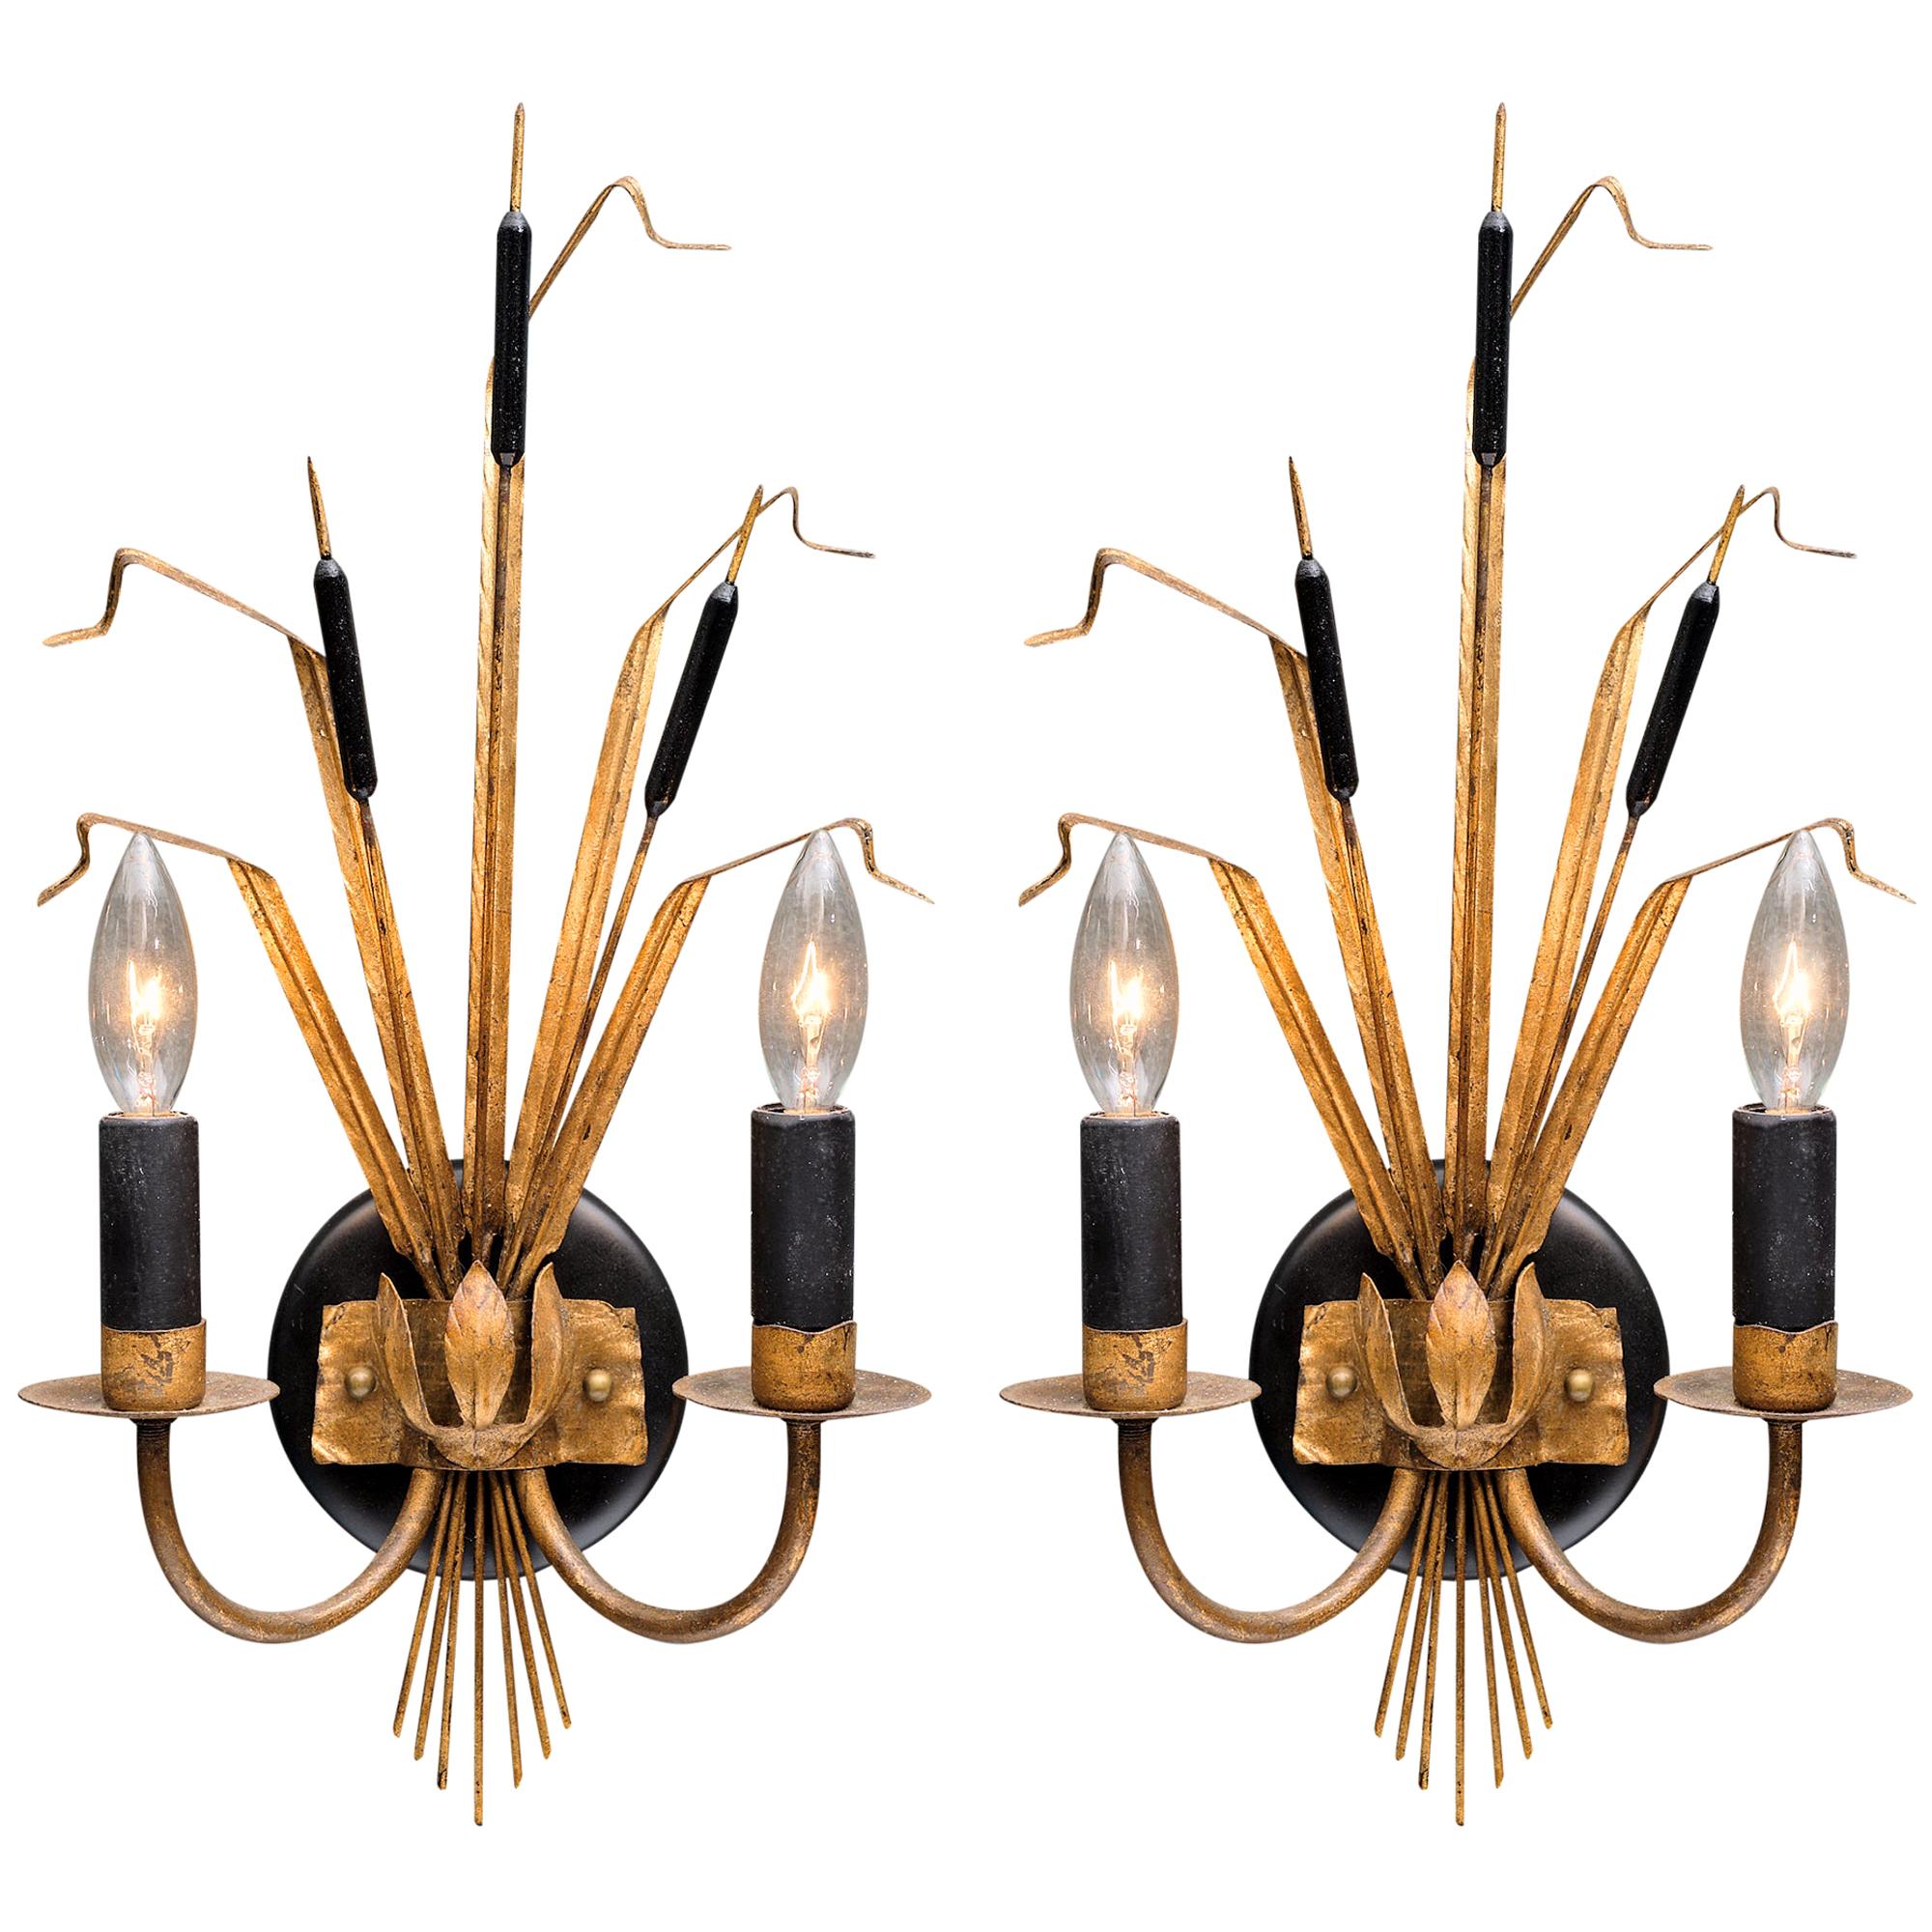 Vintage French Sheaf of Wheat Sconces by Maison Baguès